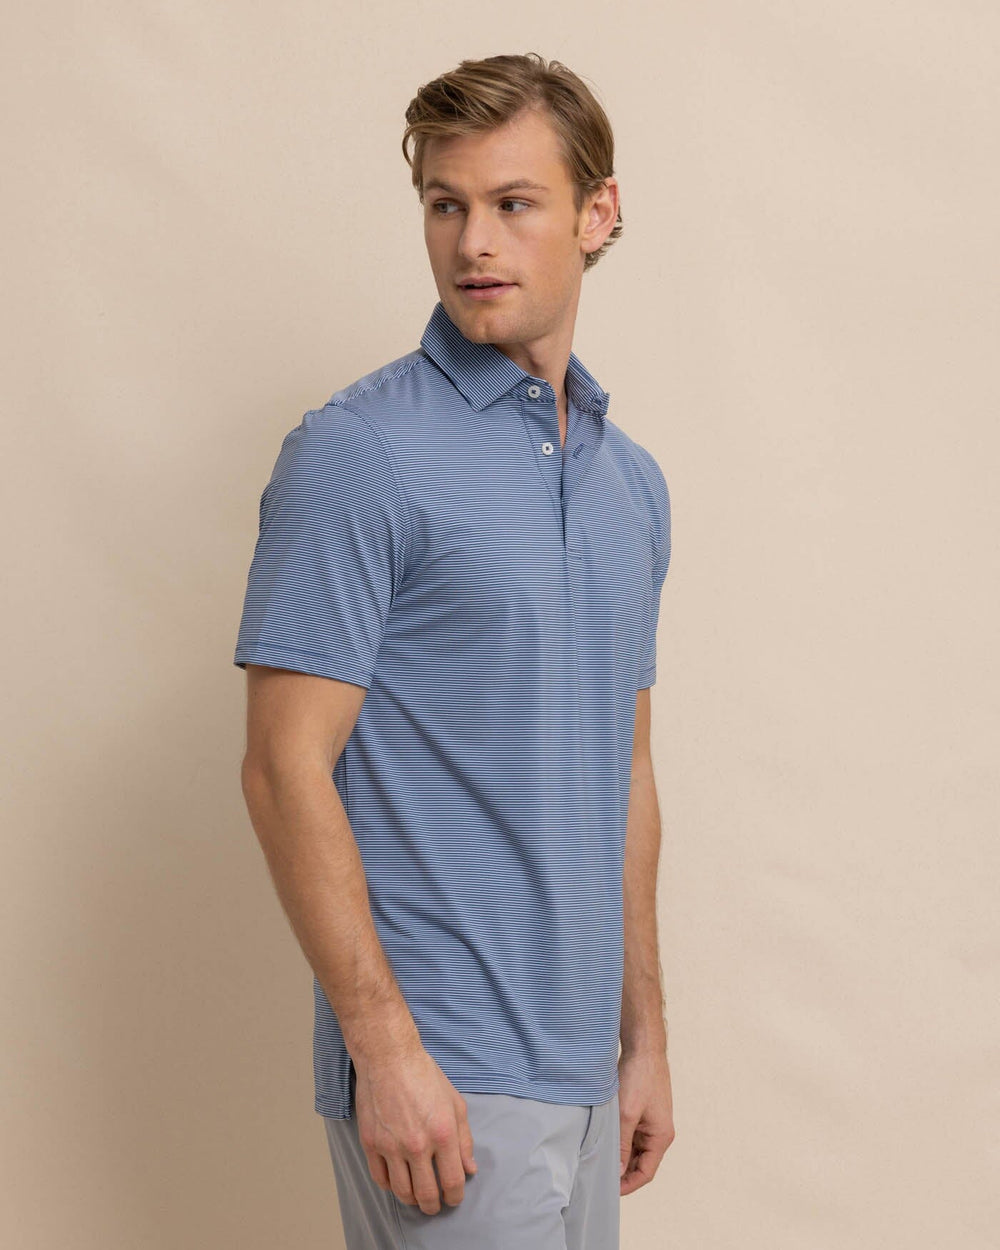 The front view of the Southern Tide brrr-eeze Baytop Stripe Performance Polo by Southern Tide - Aged Denim